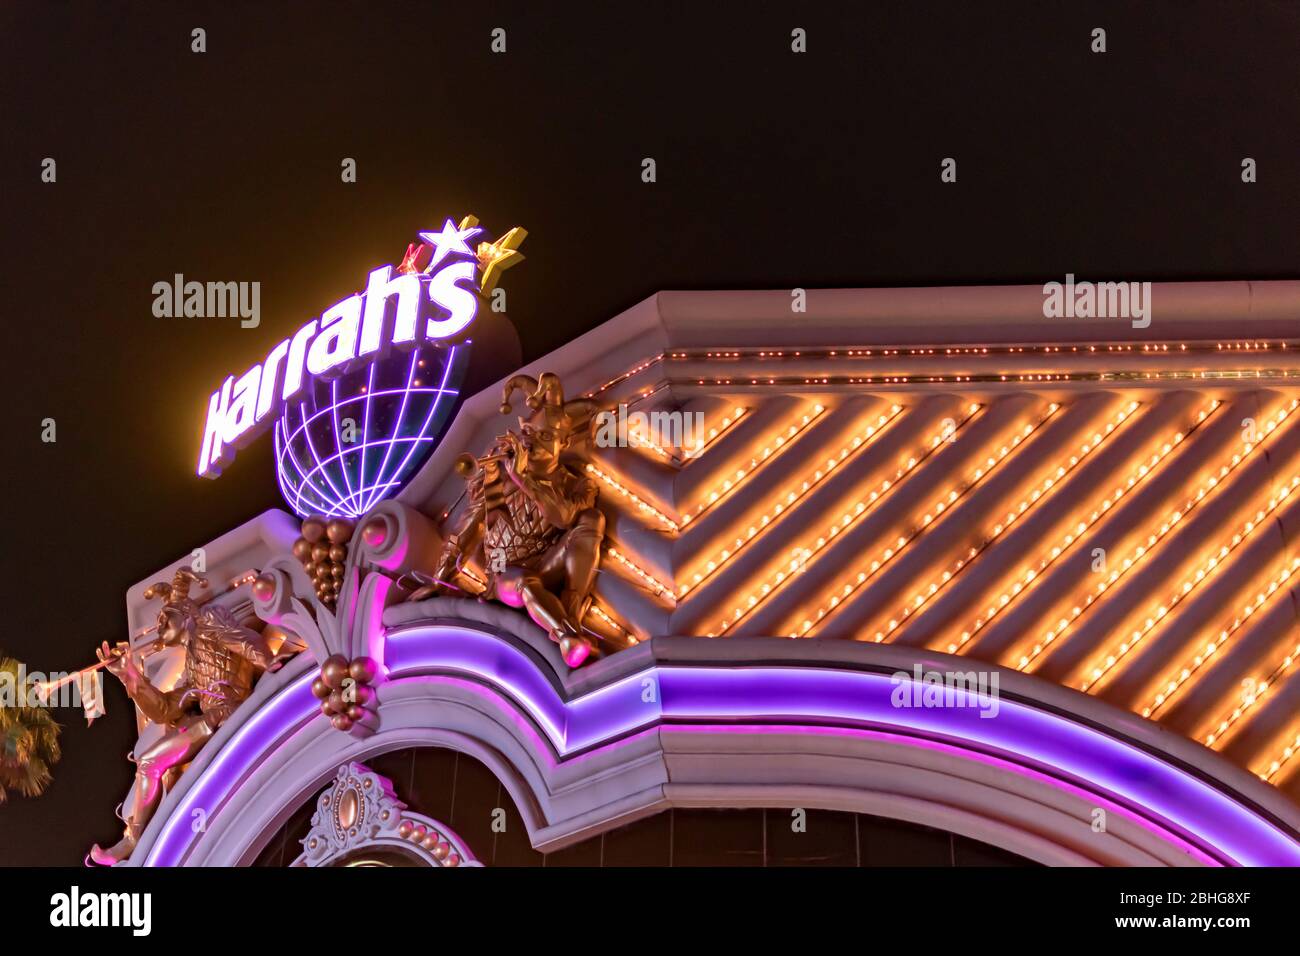 Wallpaper the sky, lights, Palma, street, tower, home, the evening, Las  Vegas, USA, Nevada, casino images for desktop, section город - download